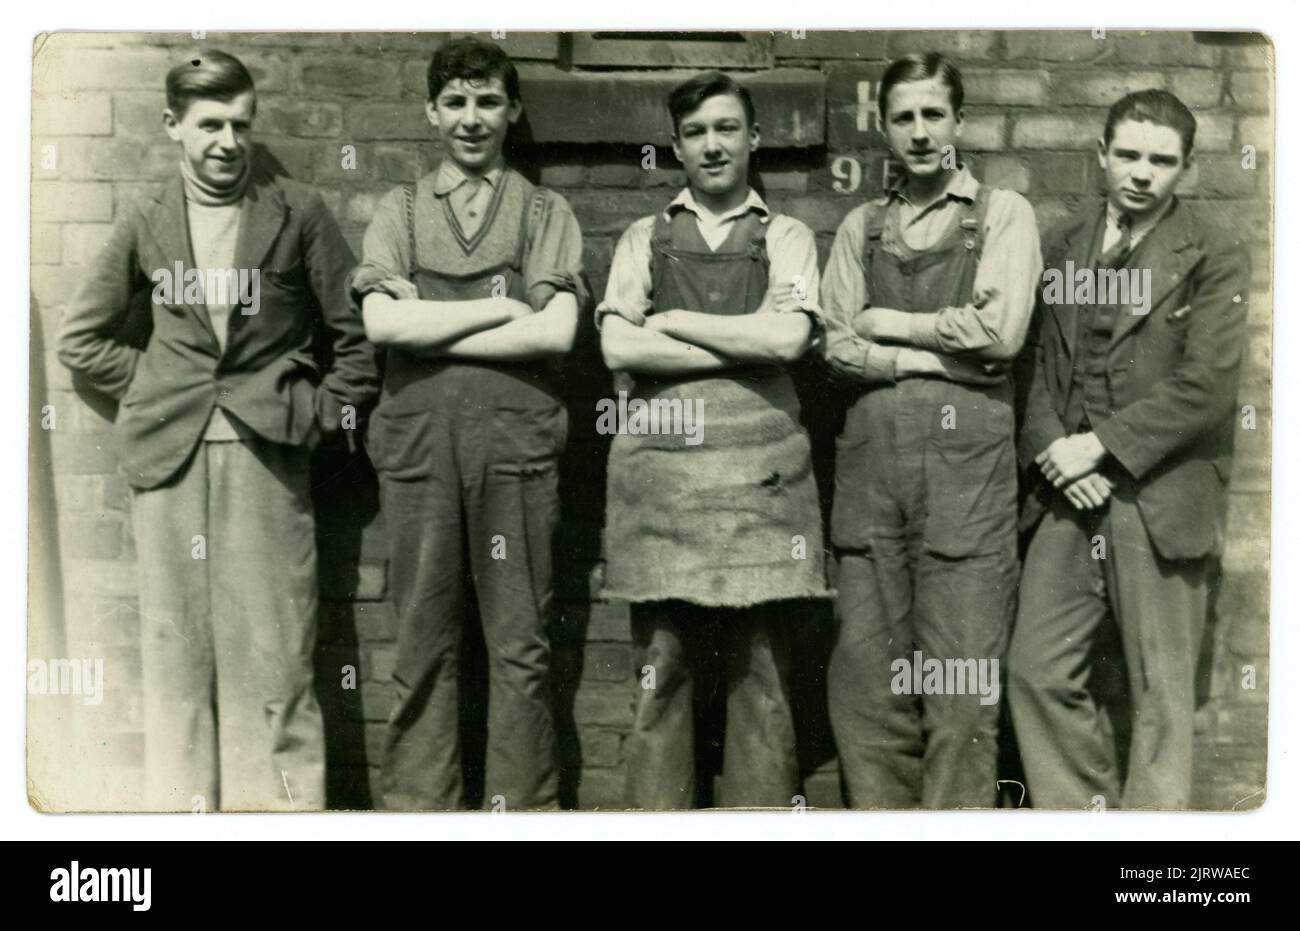 Original 1930's era postcard of five cheerful looking working class lads, possibly on apprenticeships, in industry or construction. One young man is wearing an apron, 2 are wearing overalls, 2 are wearing suit jackets and trousers, unknown location in the U.K. Stock Photo